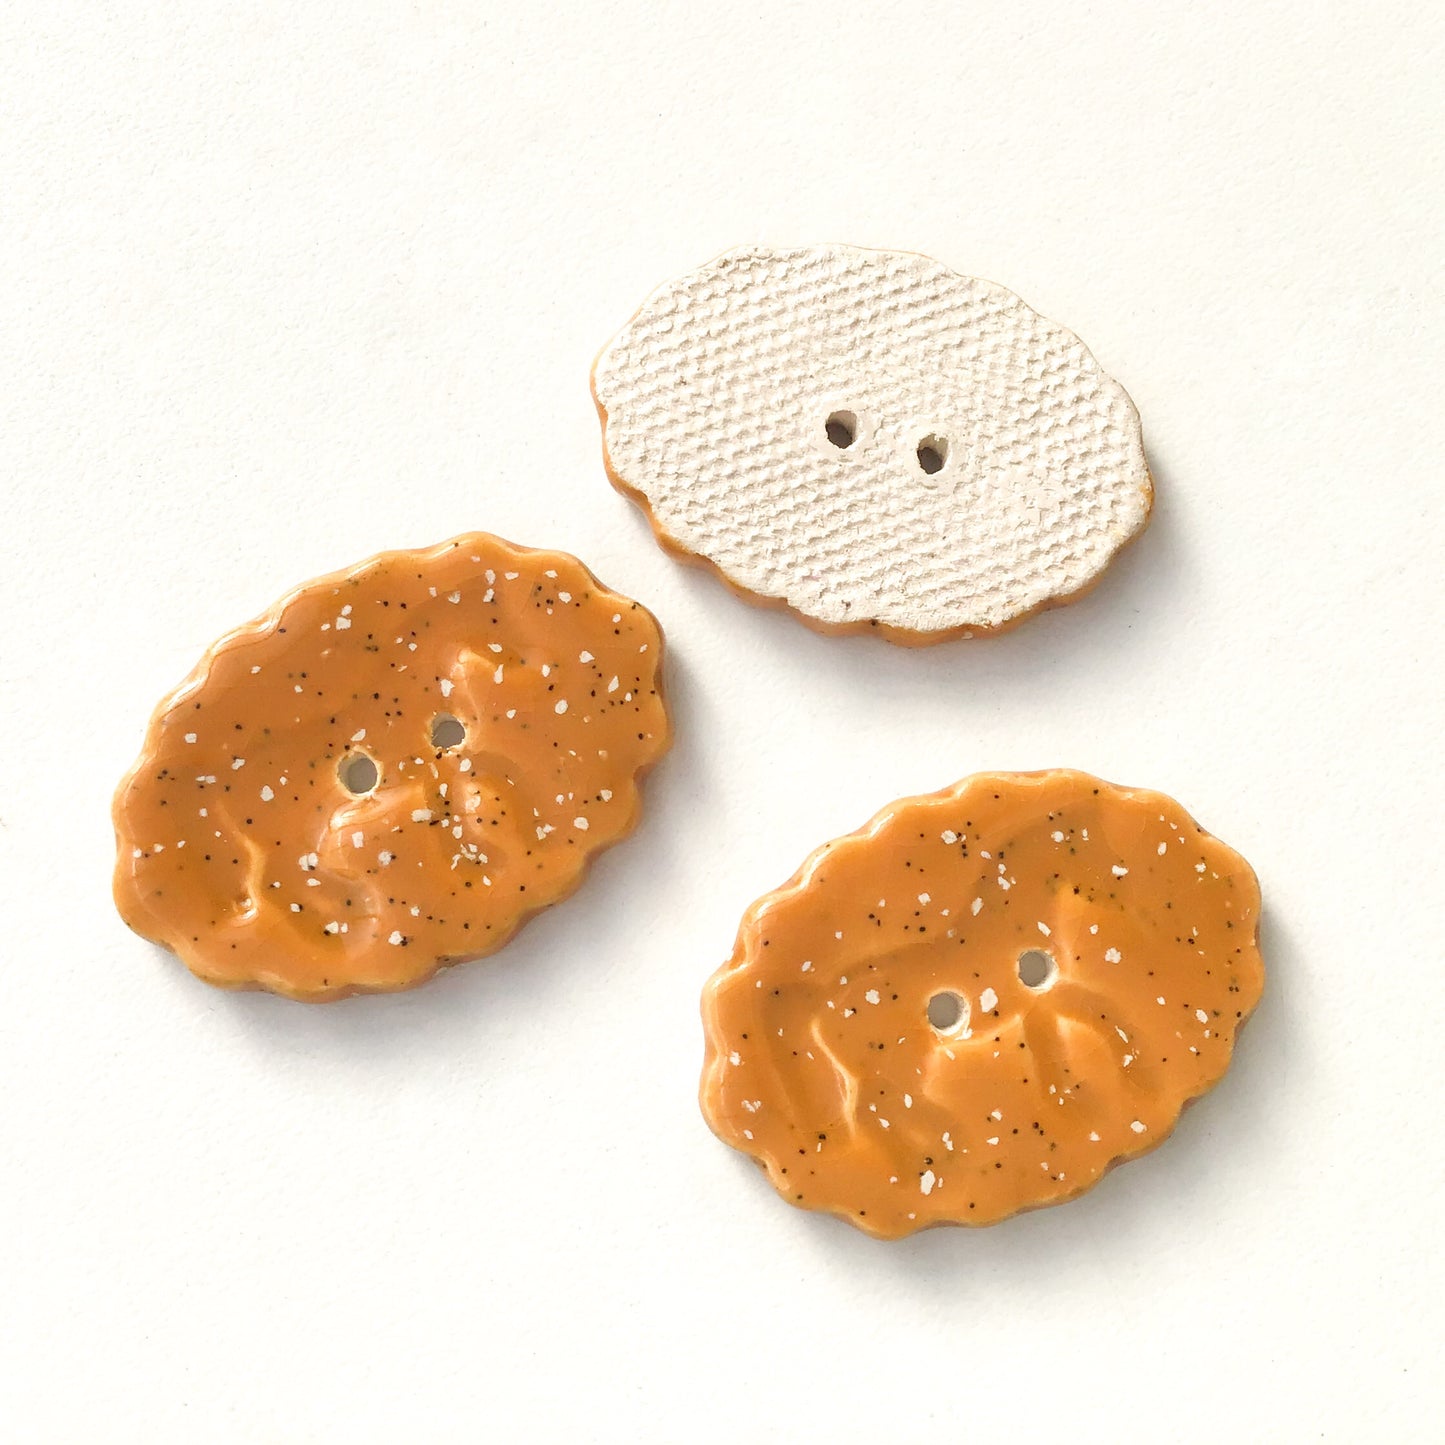 Speckled Brown Horse Buttons - Large Scalloped Clay Button - 1" x 1 3/8"